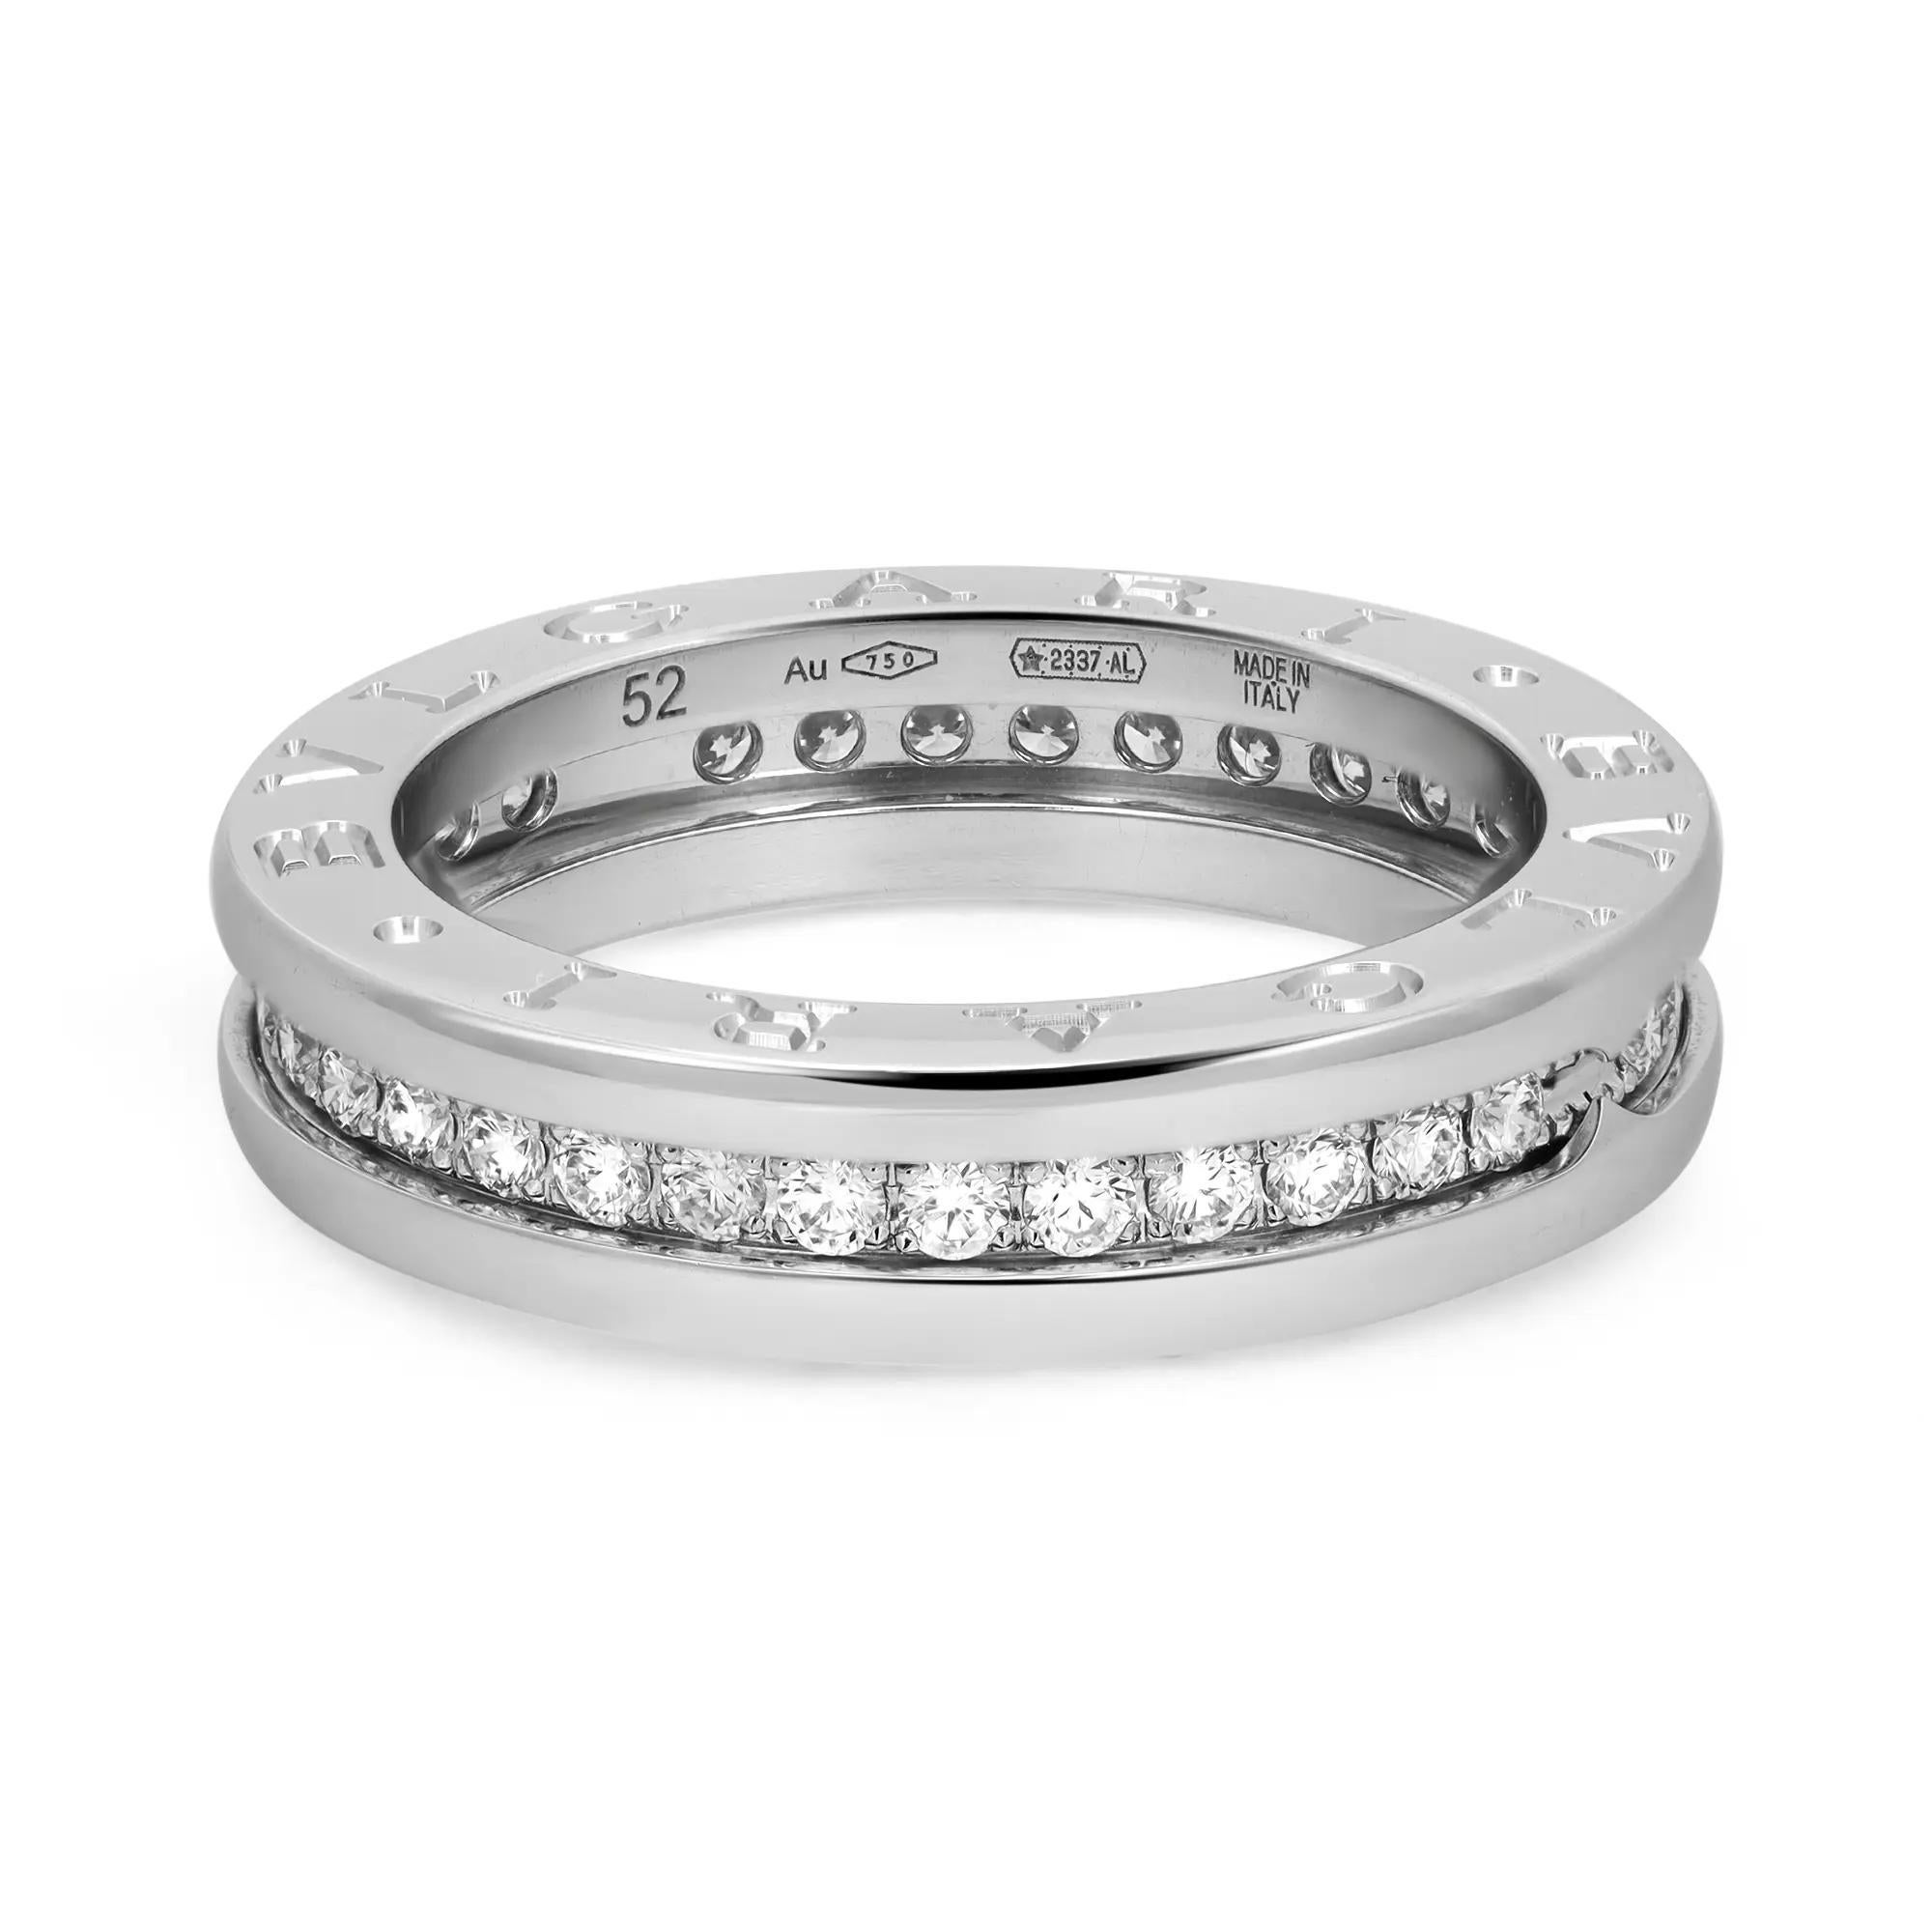 A true statement of Bvlgari’s creative vision, this ring is a perfect fit for your jewelry collection. Crafted in lustrous 18K white gold. It features a one band ring studded with channel set round brilliant cut diamonds with a Bvlgari logo engraved